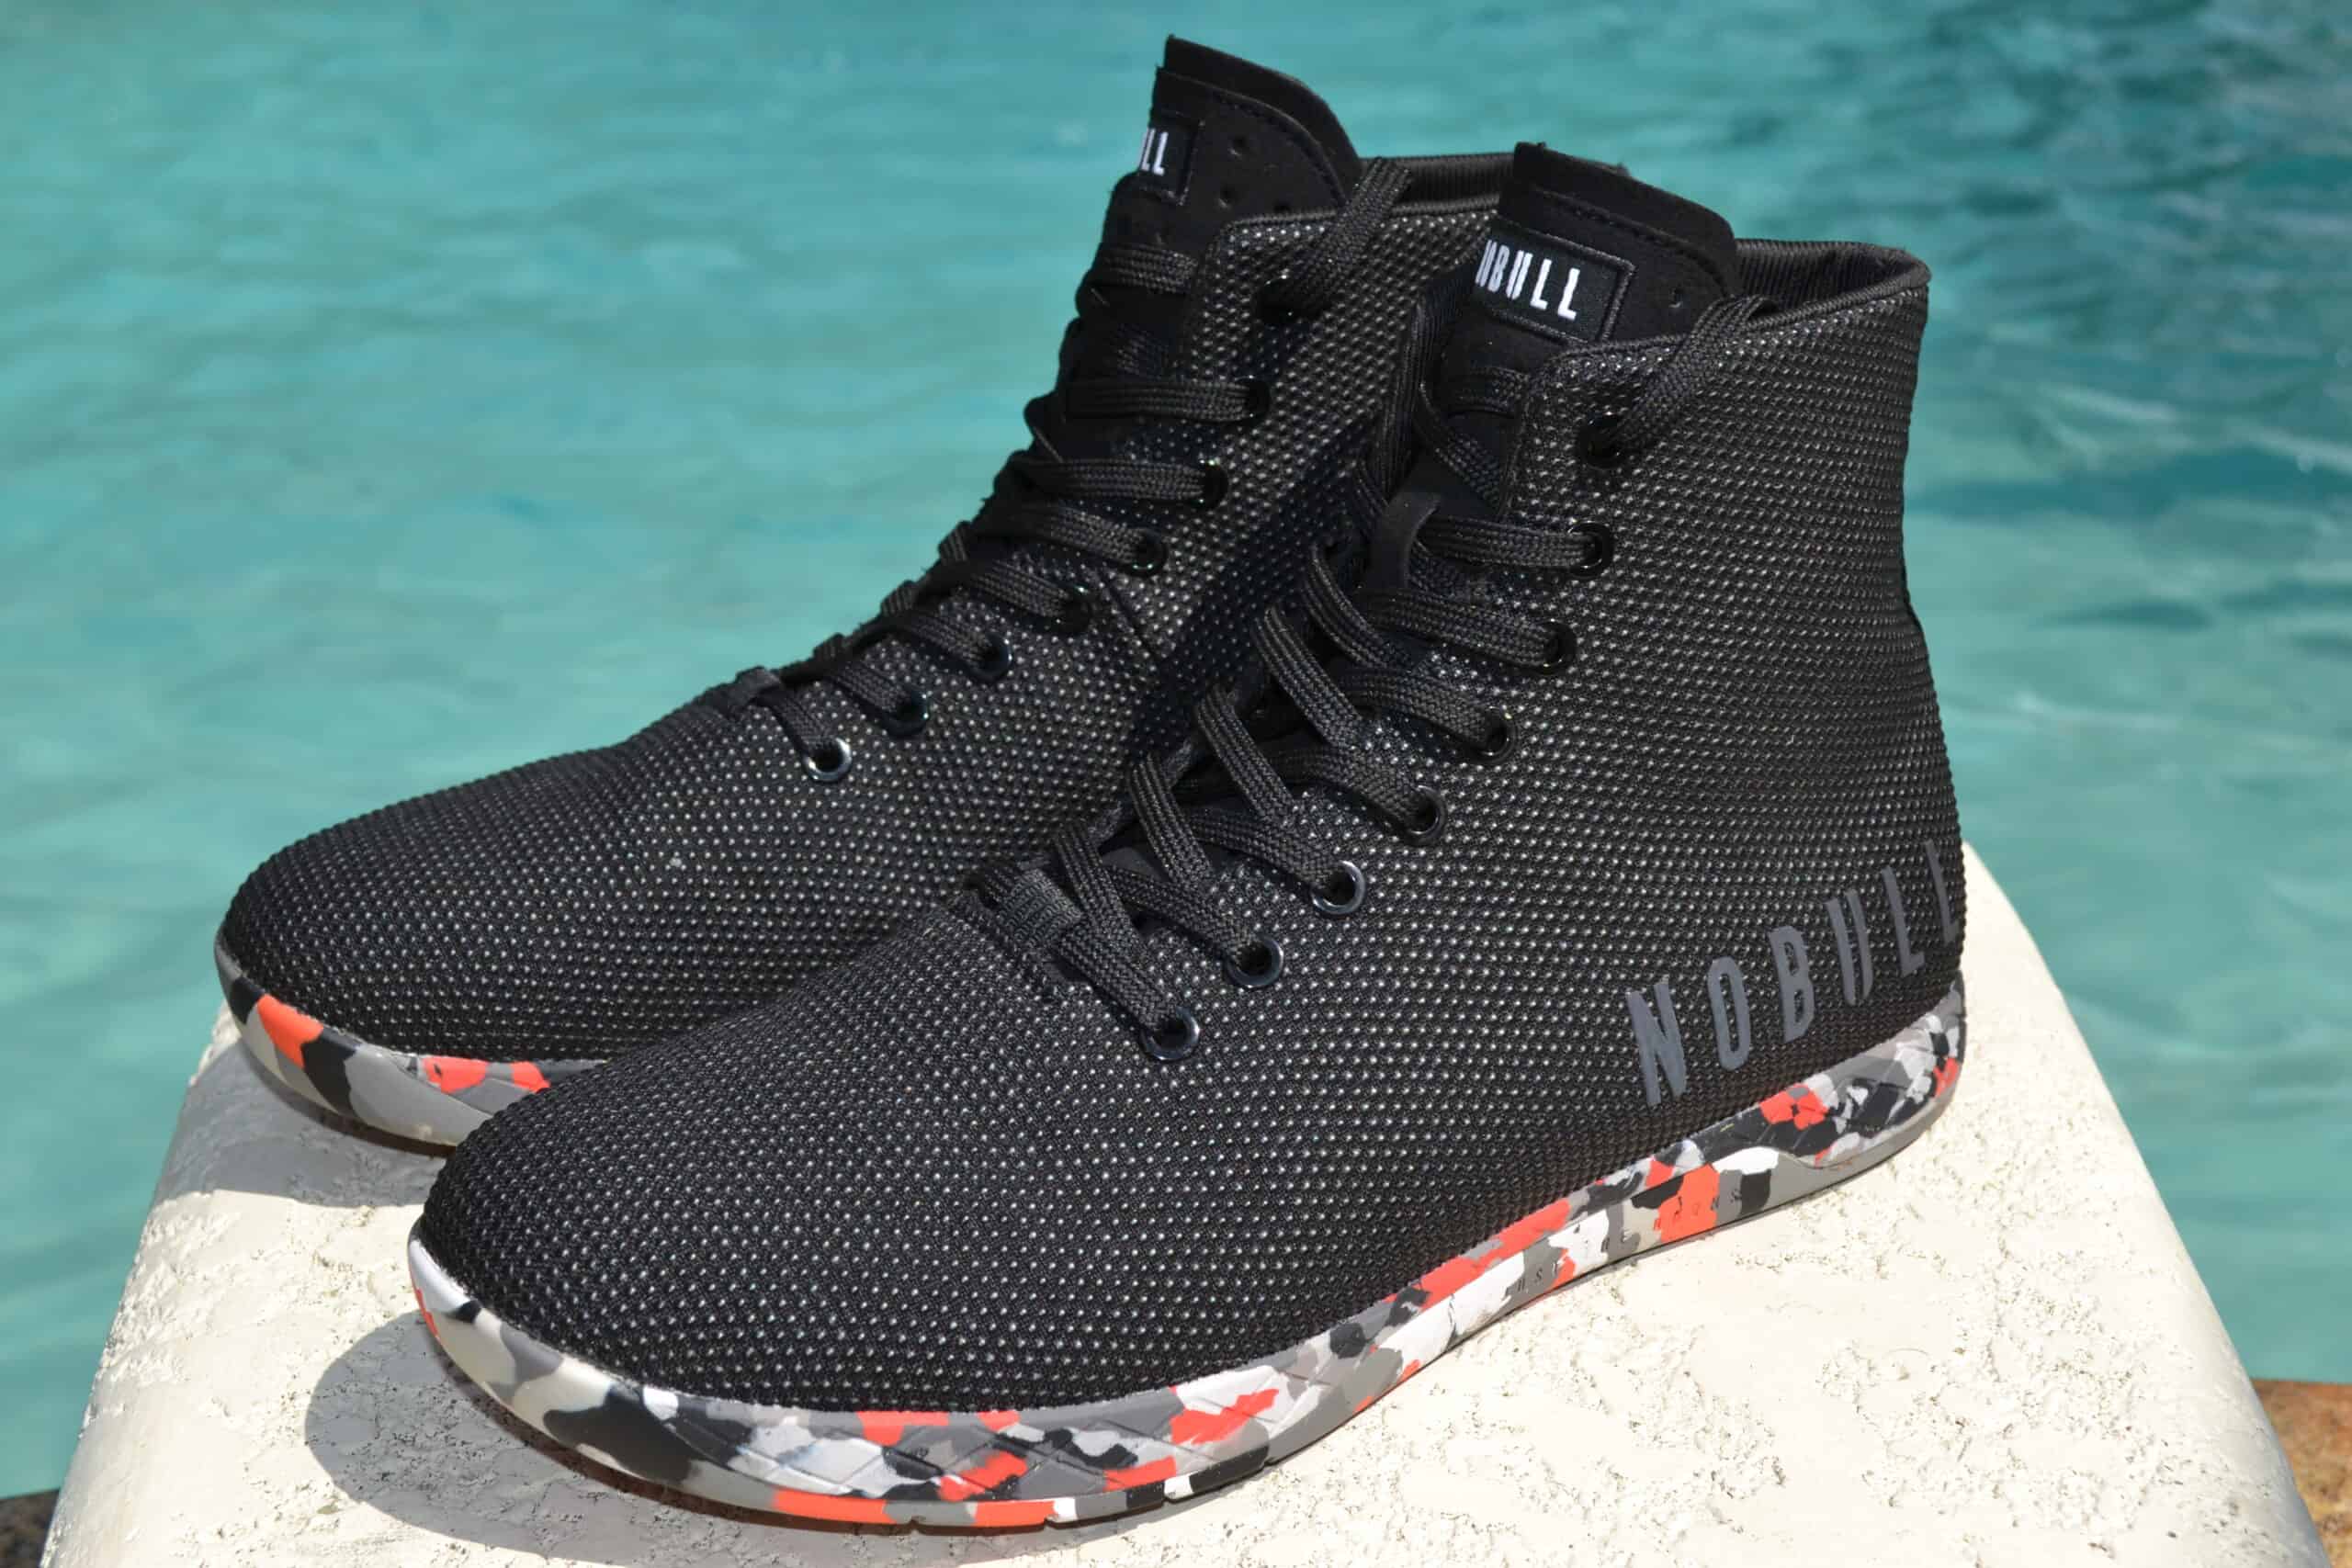 NOBULL High Top Trainer Review  Best of All Worlds Shoe? 